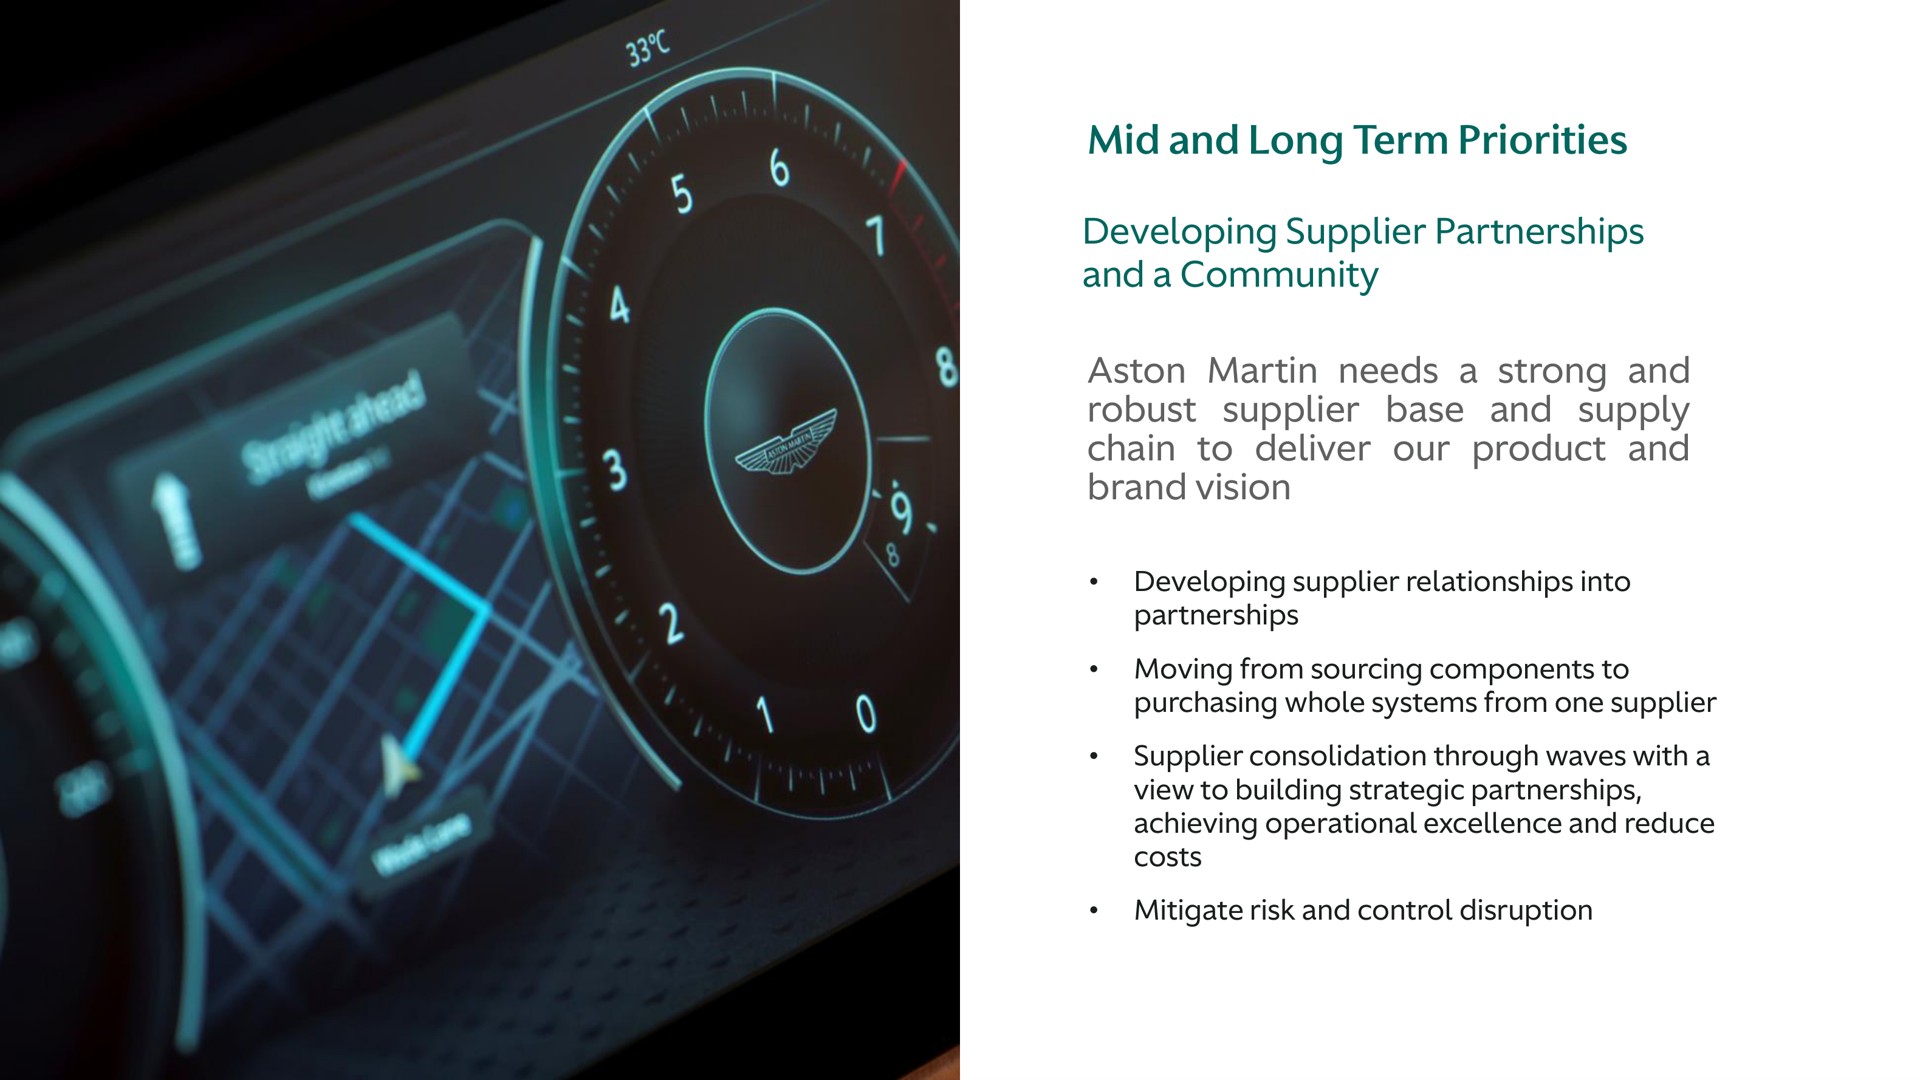 mid and long term priorities developing supplier partnerships and a community martin needs a strong and robust supplier base and supply chain to deliver our product and brand vision | Aston Martin Lagonda